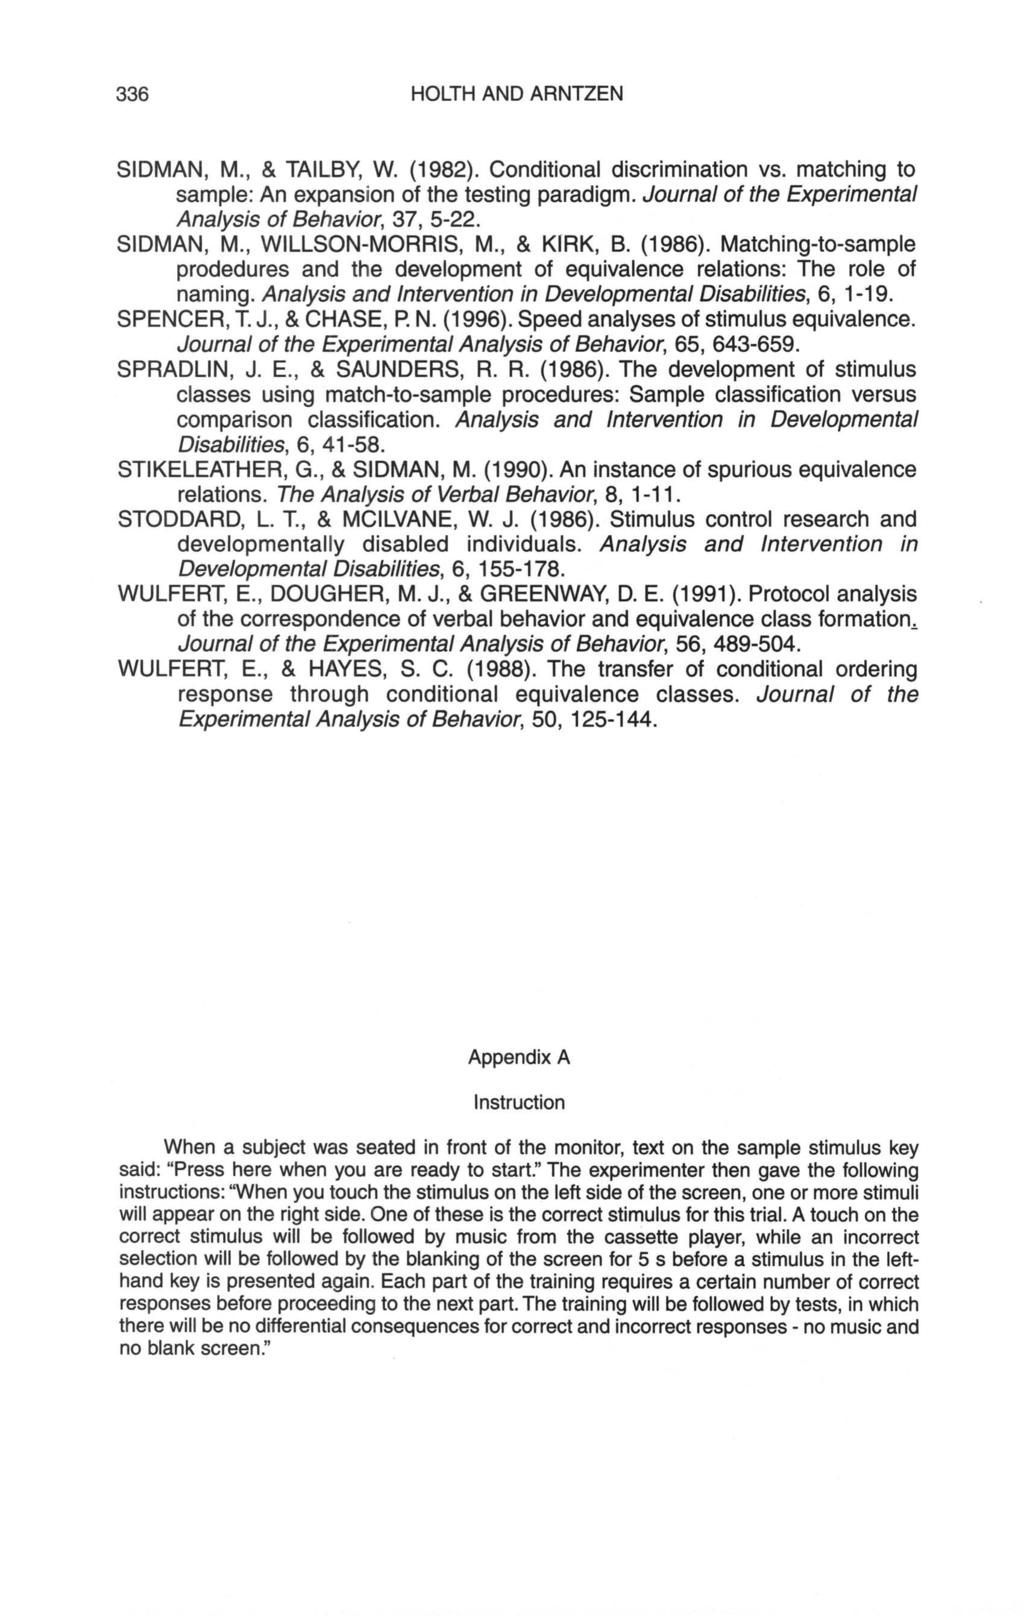 336 HOLTH AND ARNTZEN SDMAN M. & TALBY W. (1982). Conditional discrimination vs. matching to sample: An expansion of the testing paradigm. Journal of the Experimental Analysis of Behavior 37 5-22.